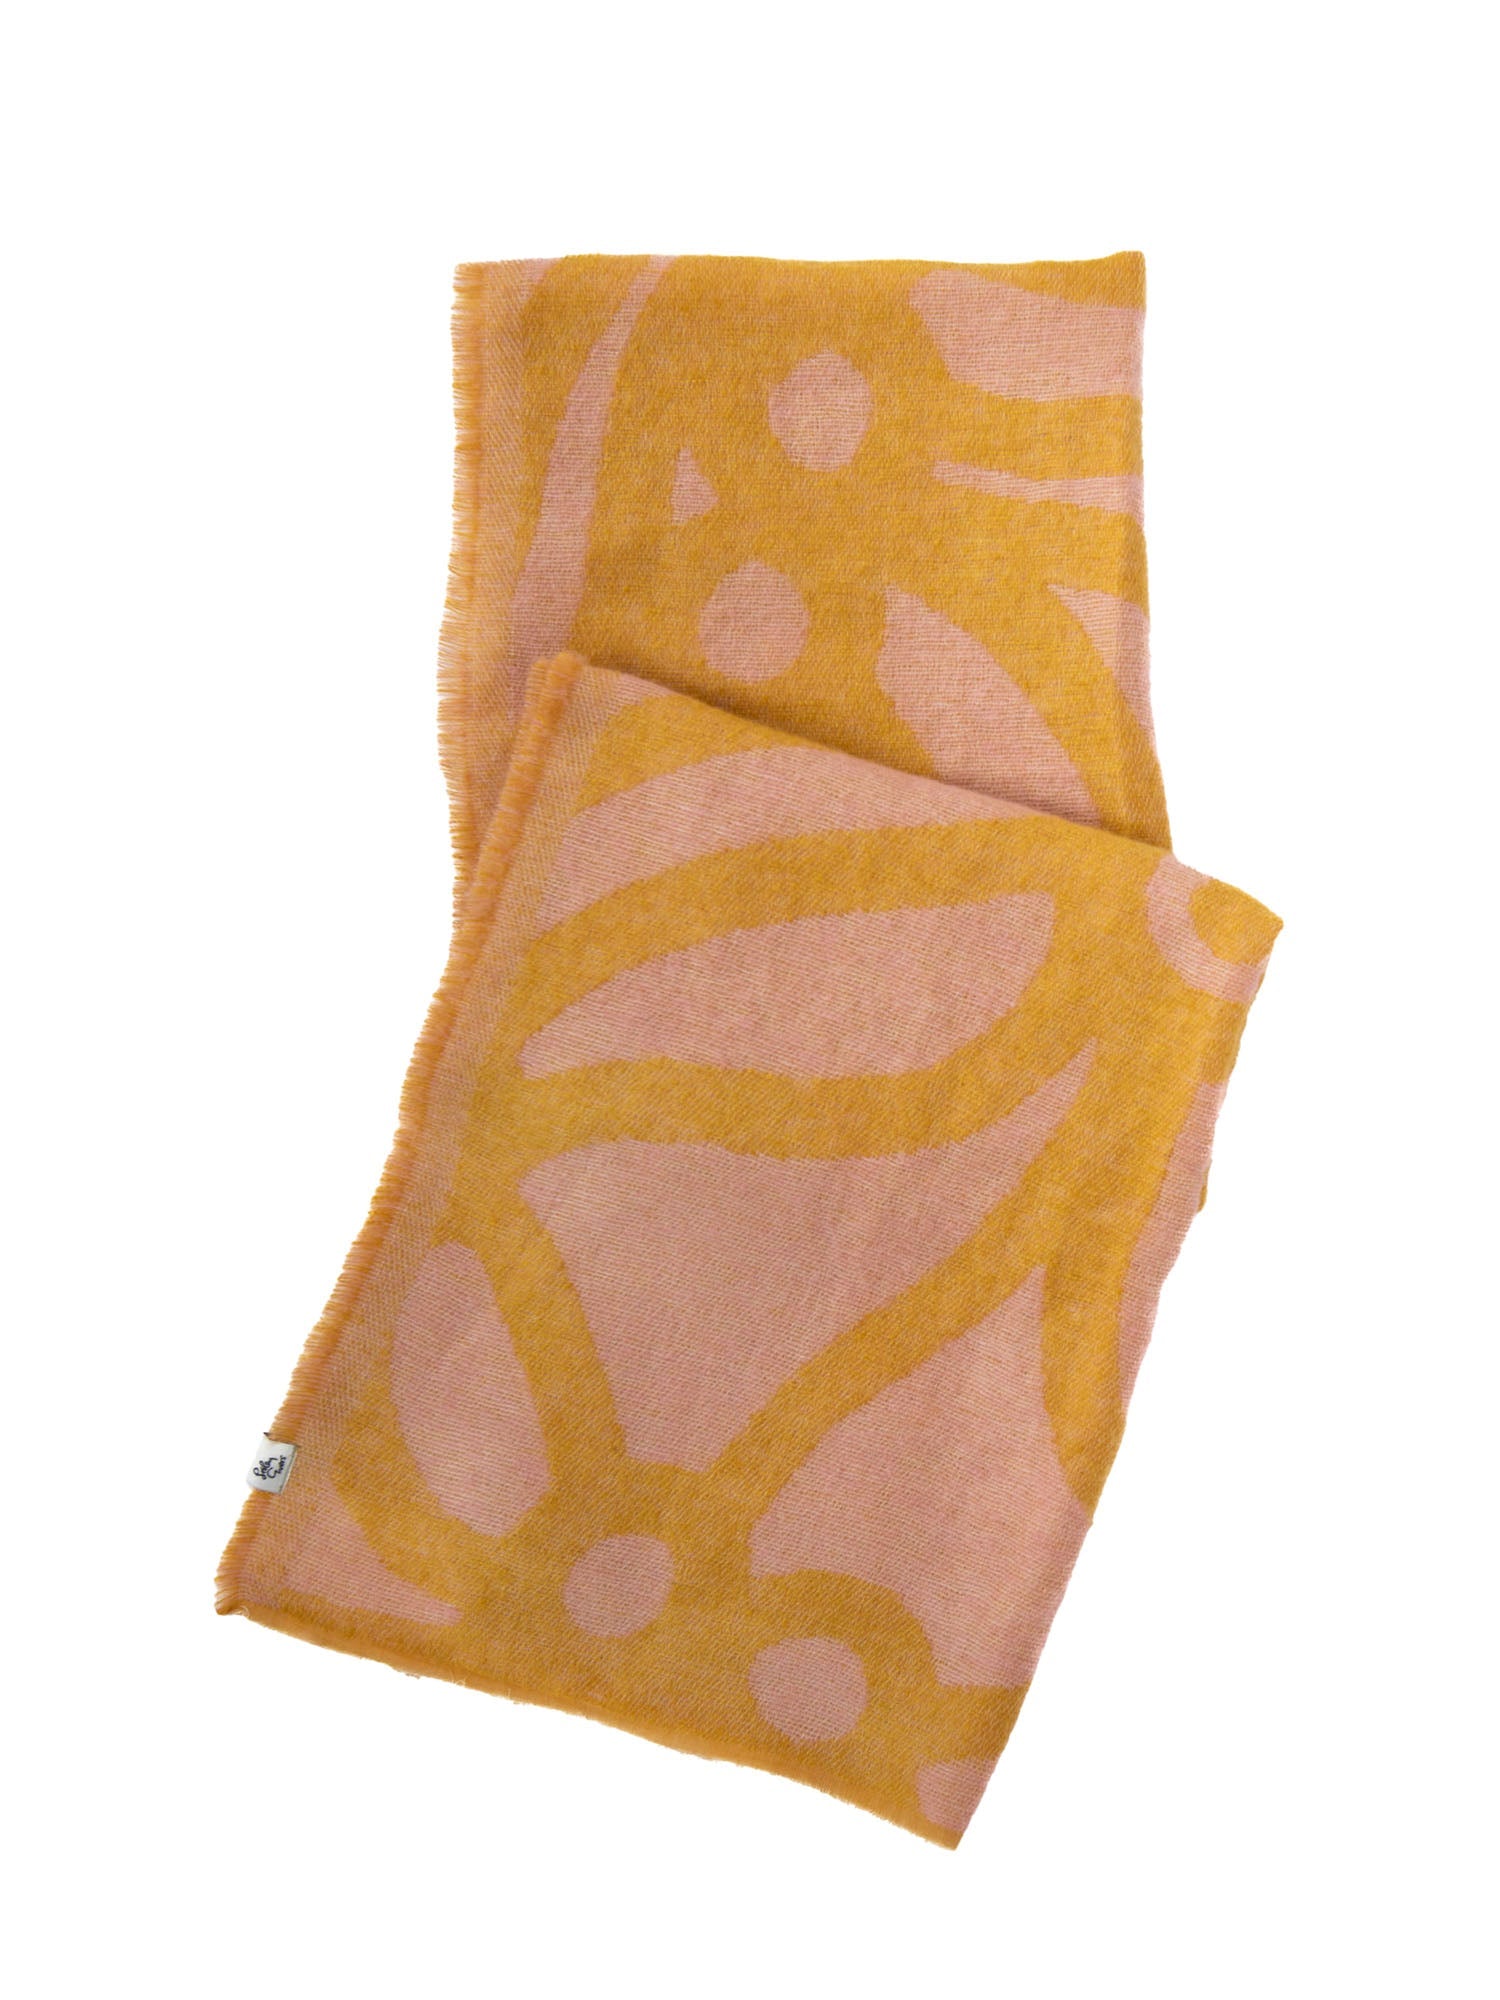 SHANNON scarf Chicka Boom Pink and Yellow - Lesley Evers-Accessories-chicka boom-chickaboom